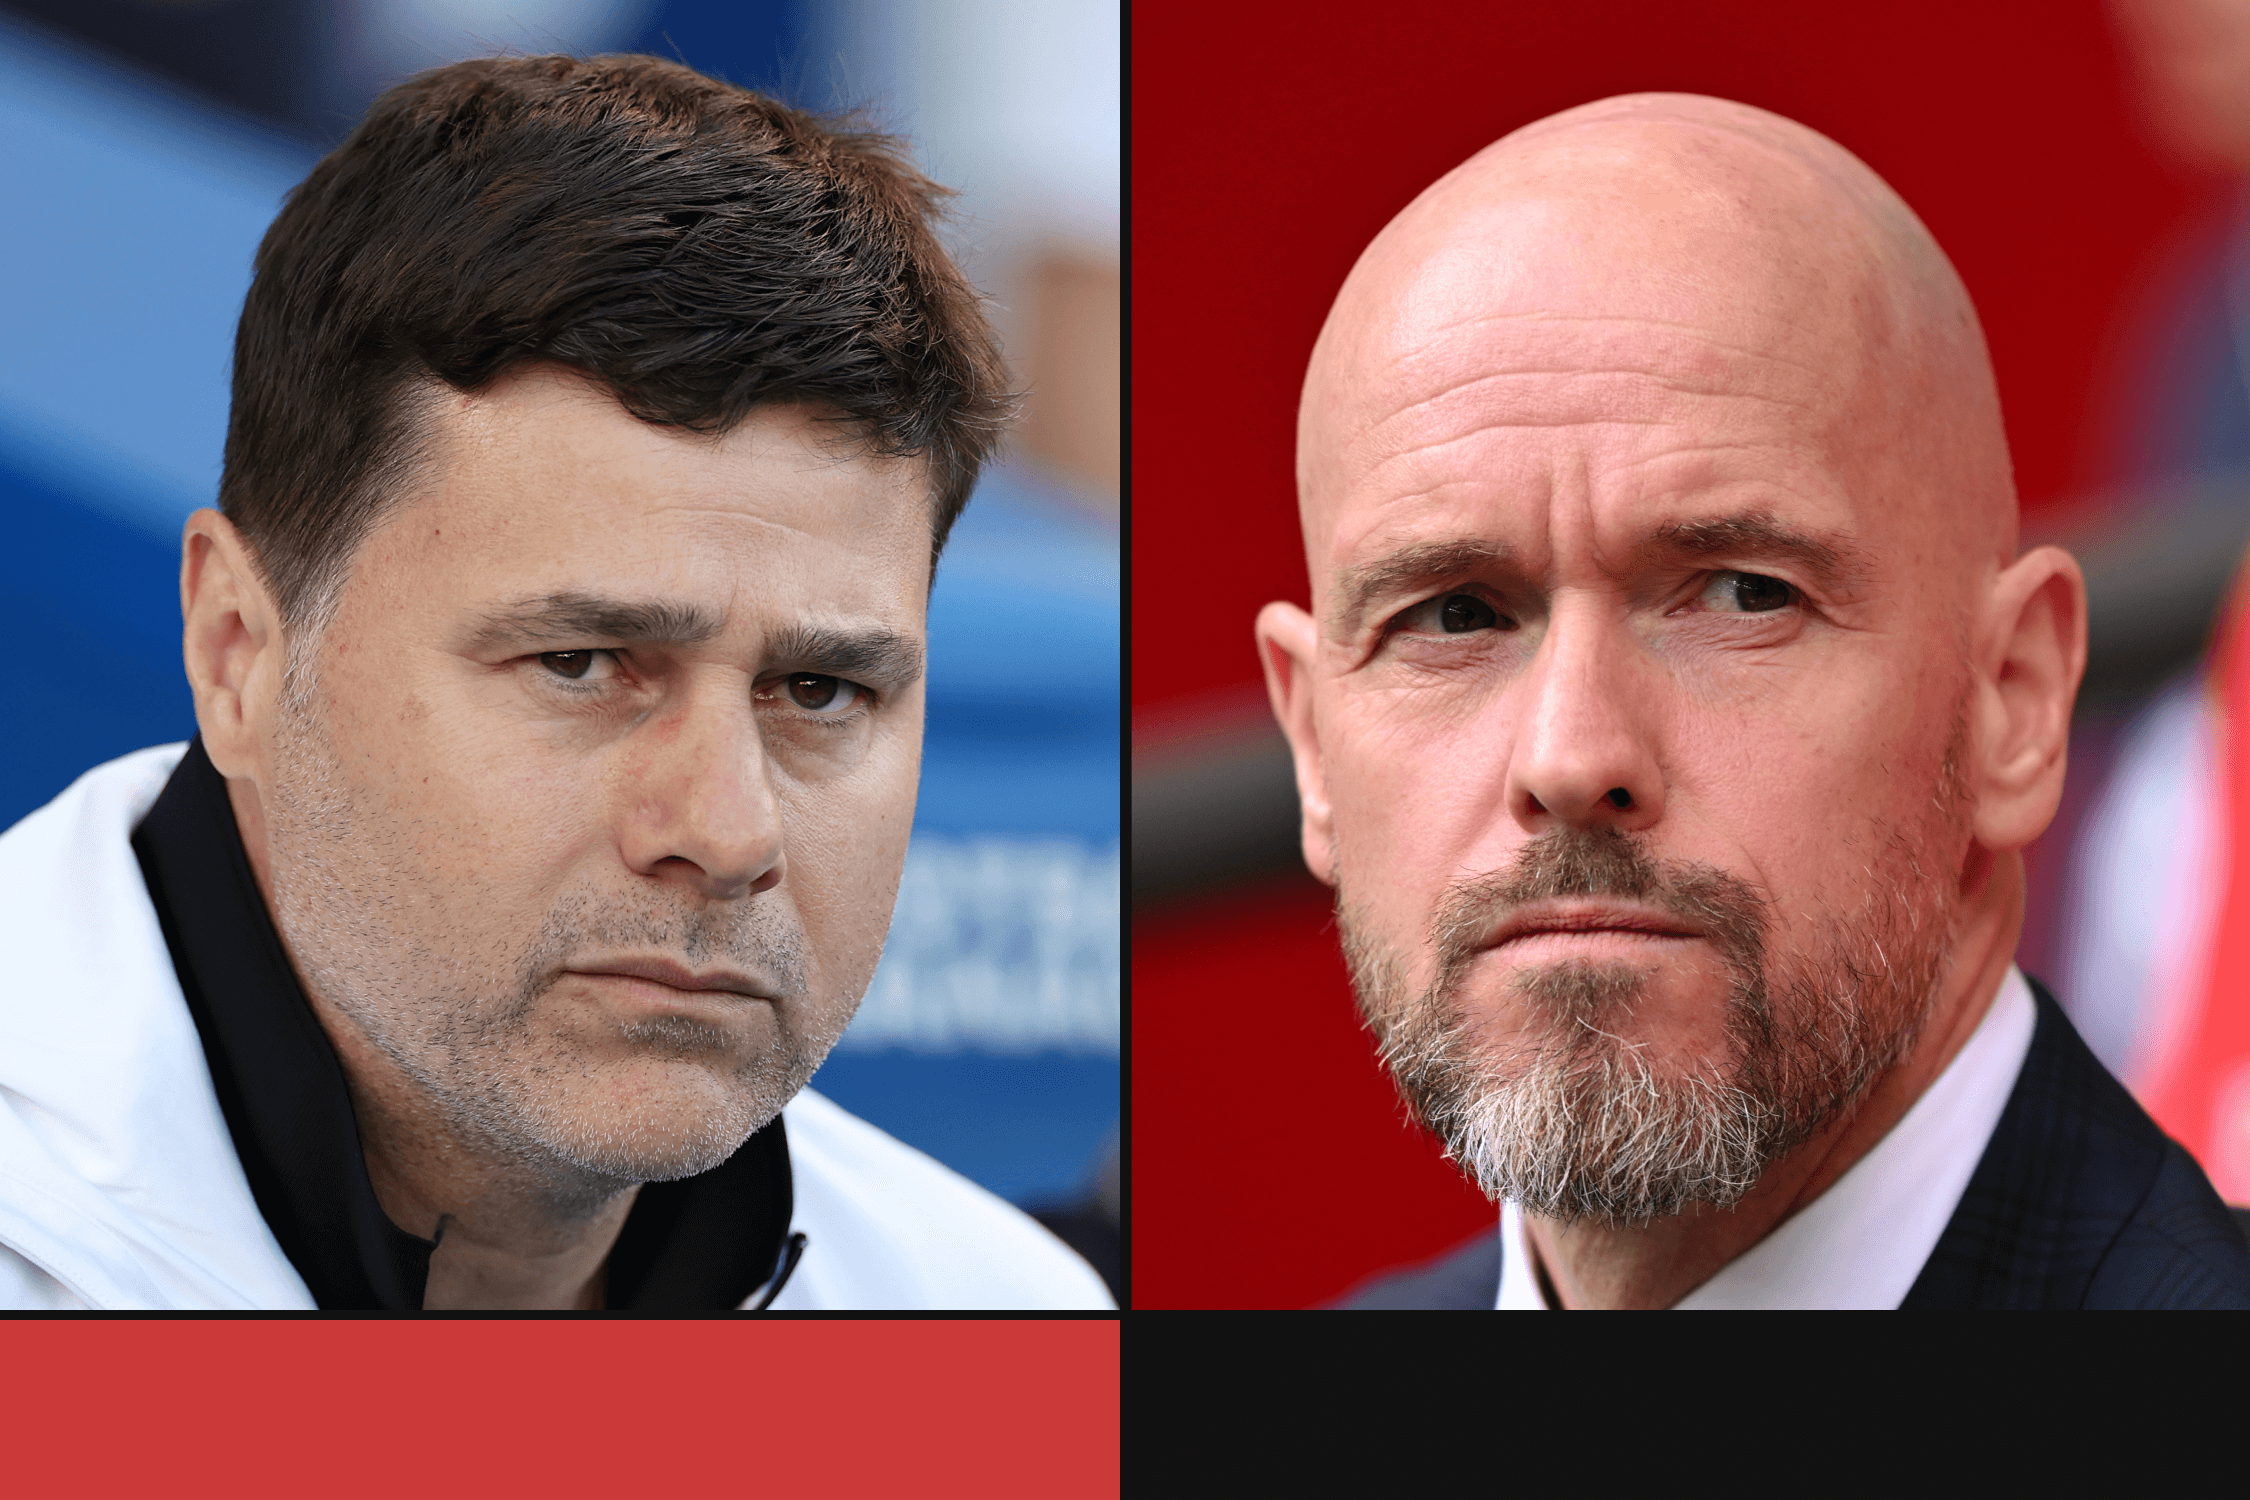 Ten Hag backed by 75%, Pochettino favoured if he goes - Manchester United survey